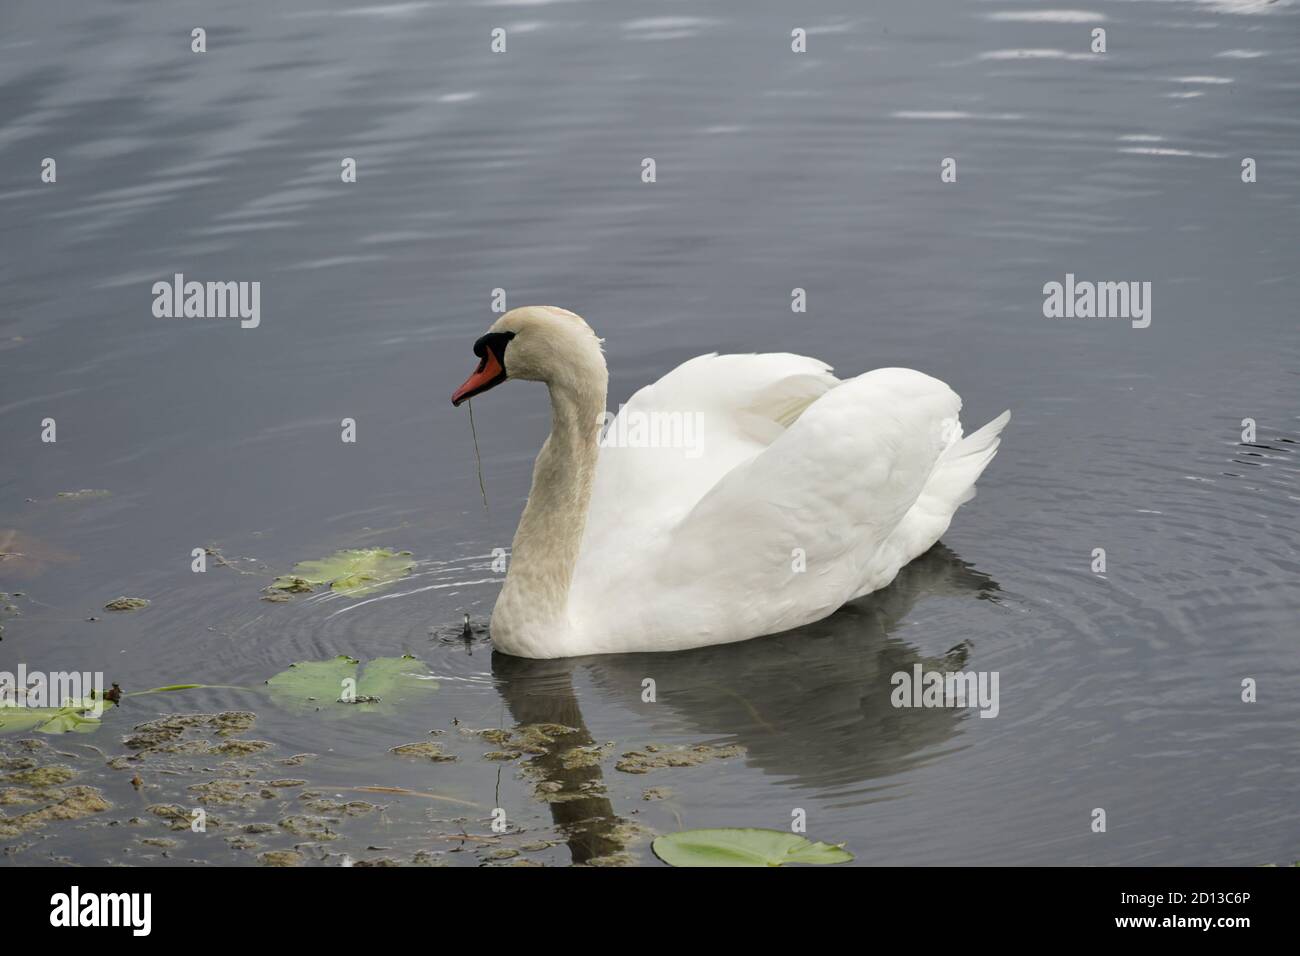 white swan swimming in pond, side view Stock Photo